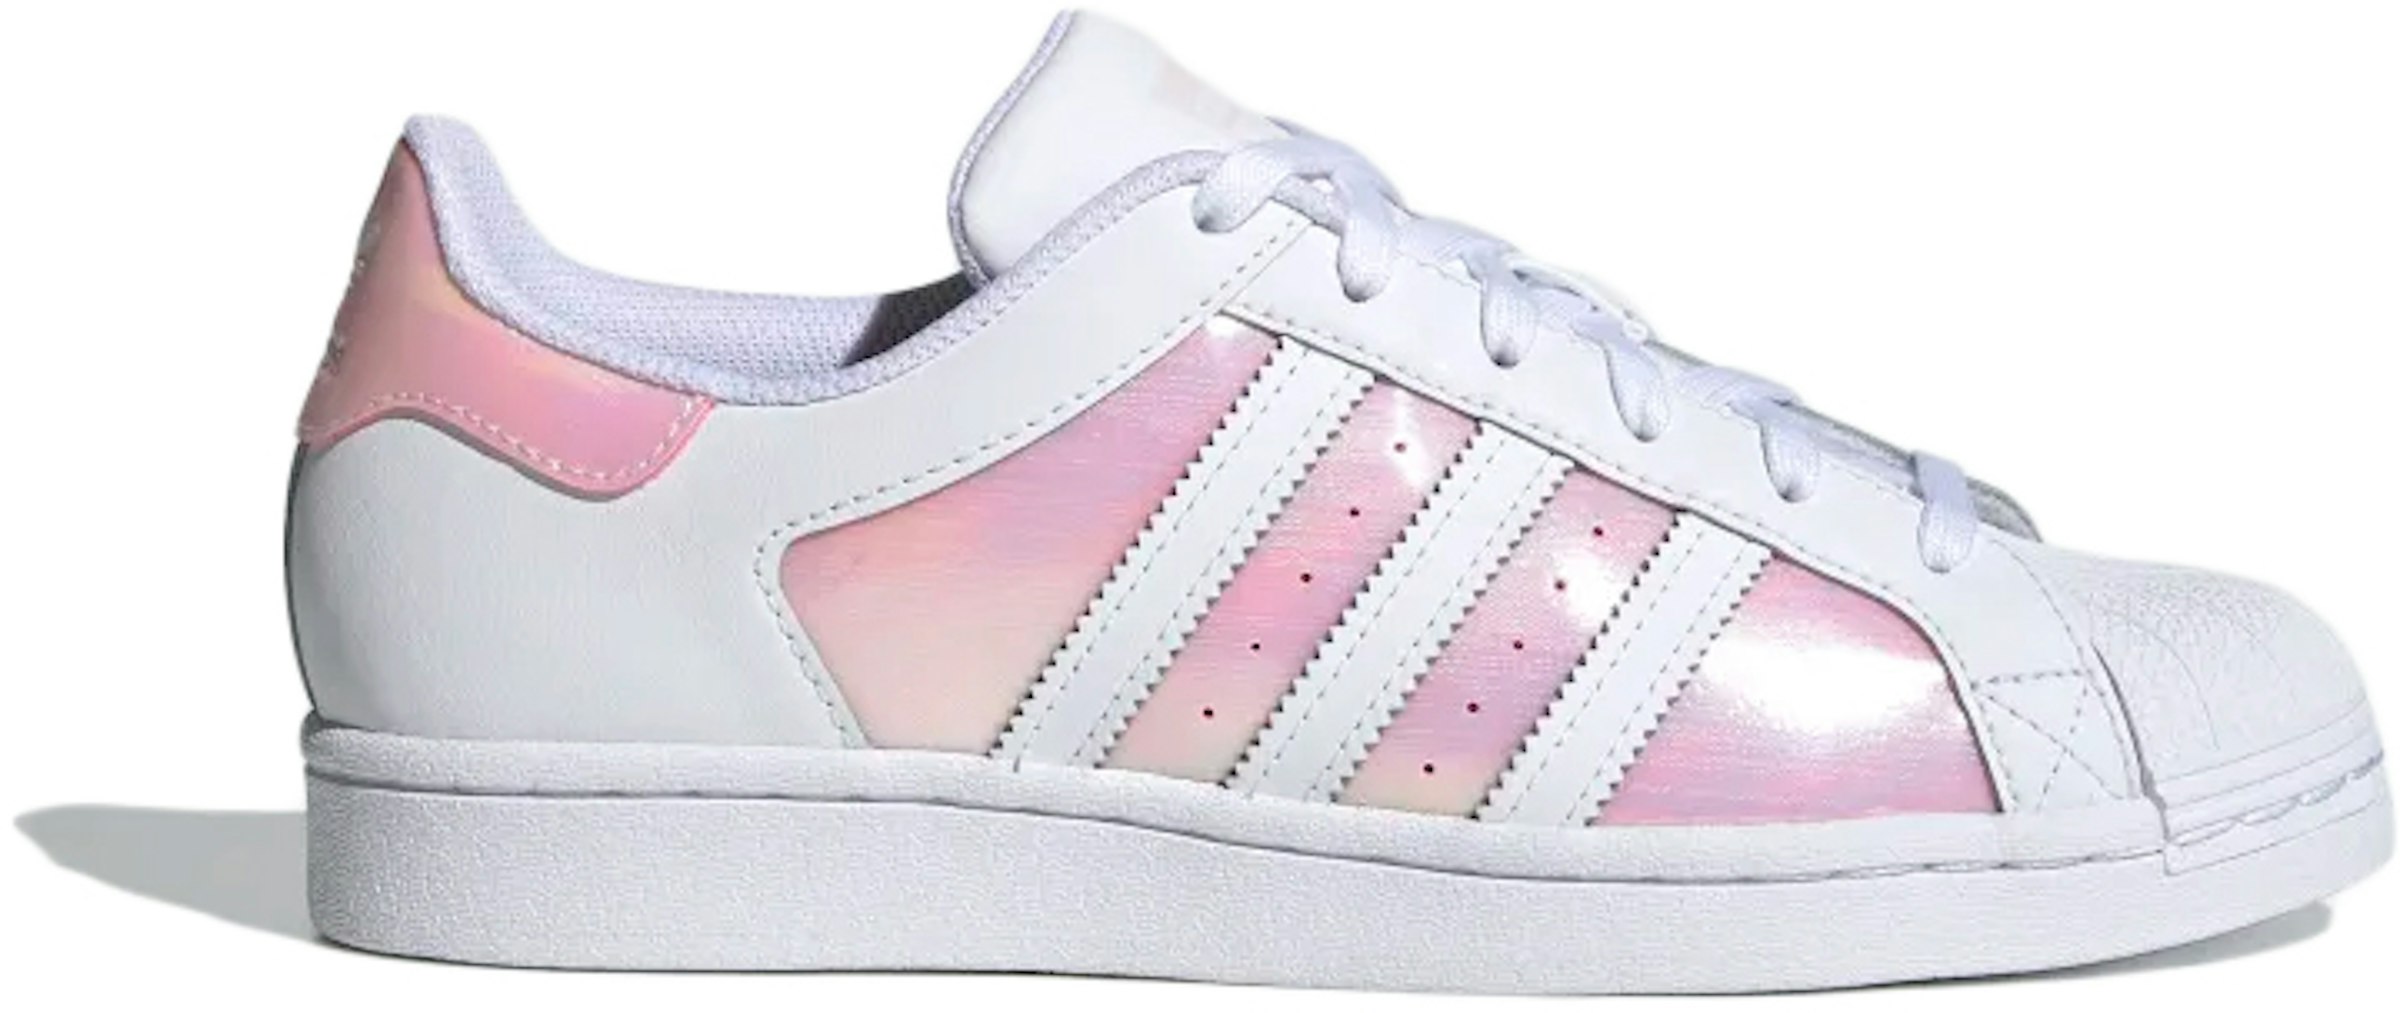 adidas White Clear Pink - FX6042 MX